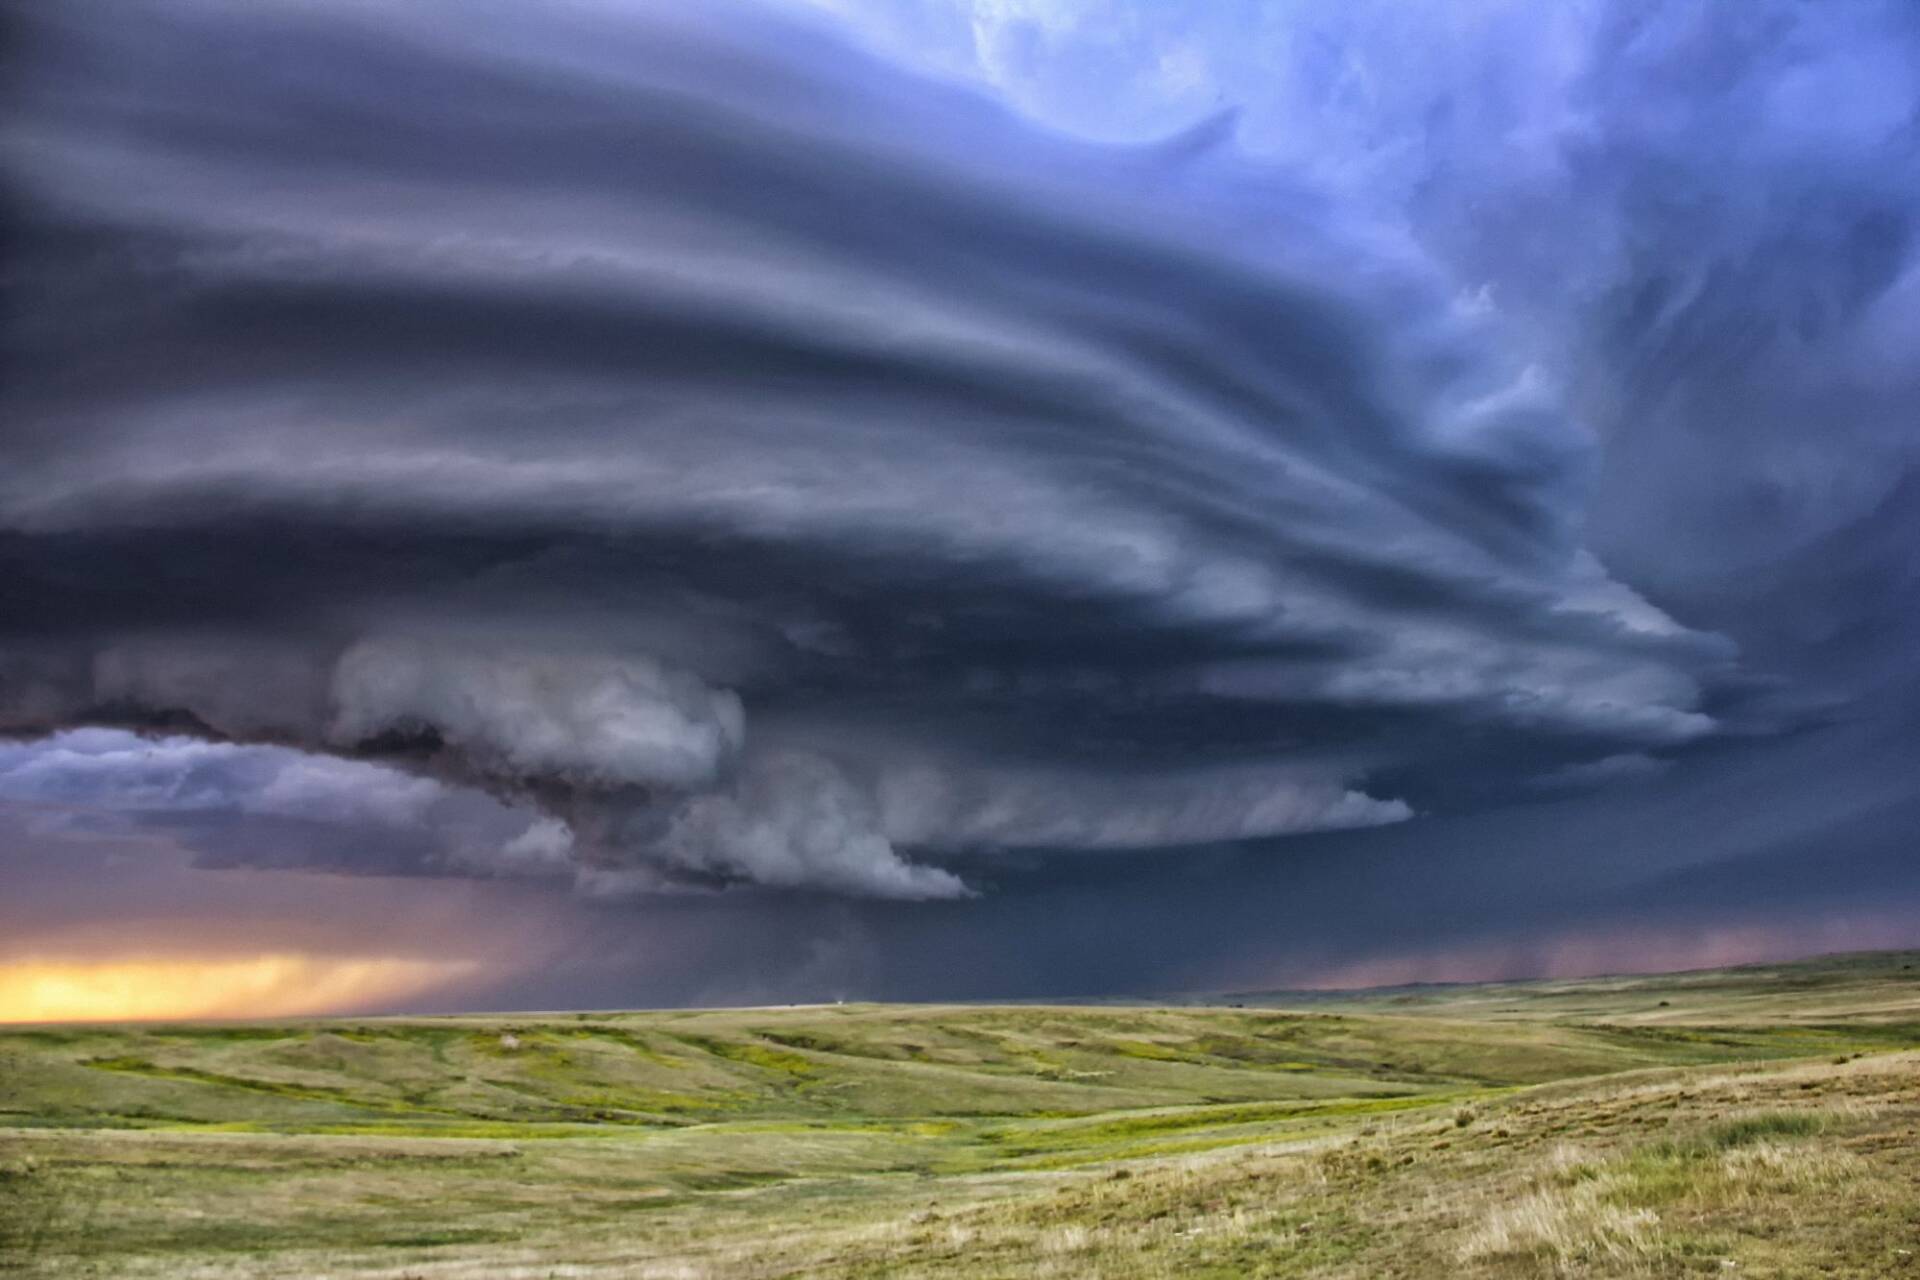 anticyclonic supercell thunderstorm over the plain